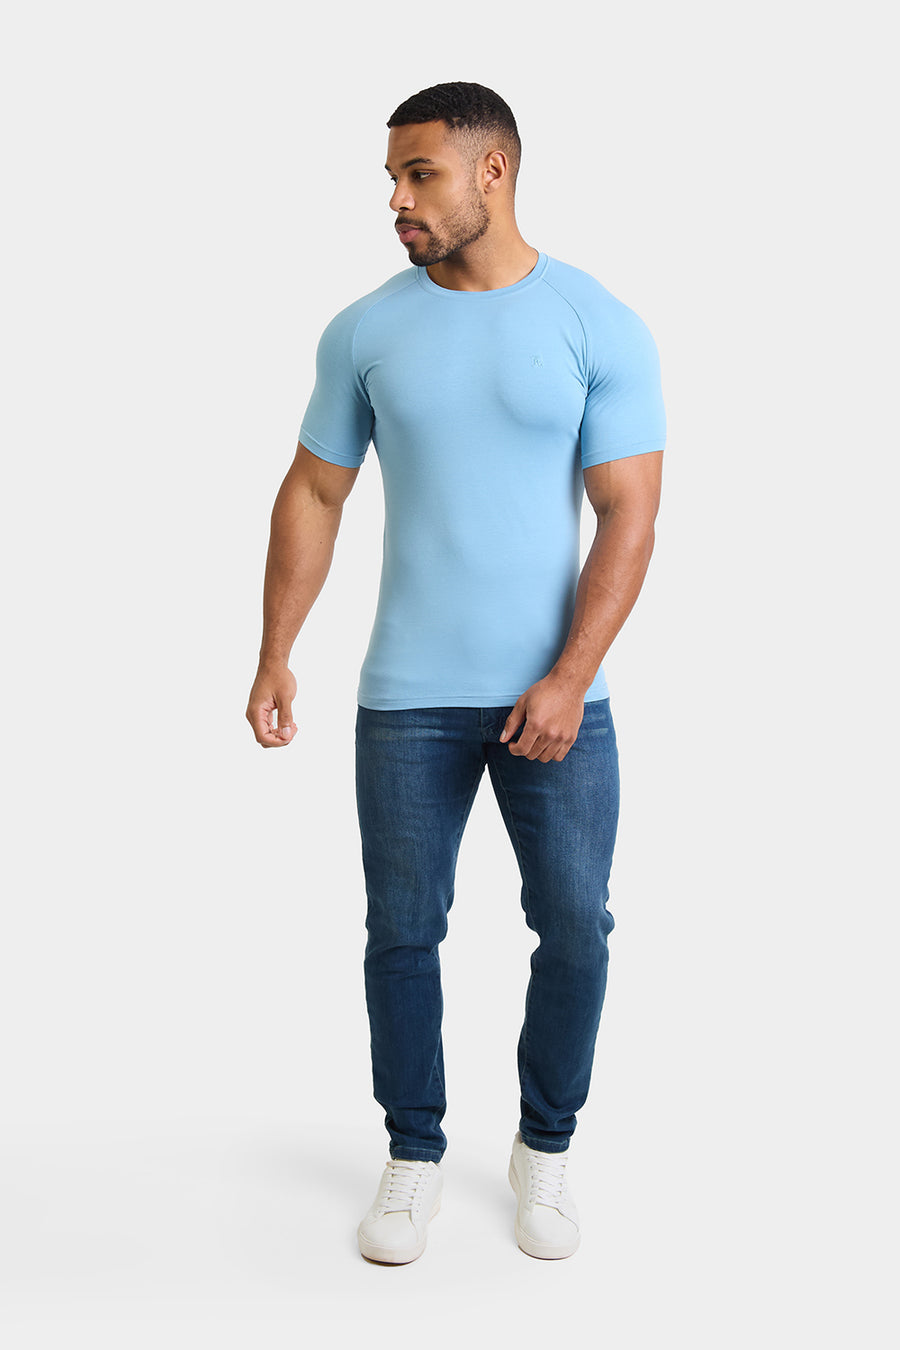 Premium Athletic Fit T-Shirt in Mist Blue - TAILORED ATHLETE - USA